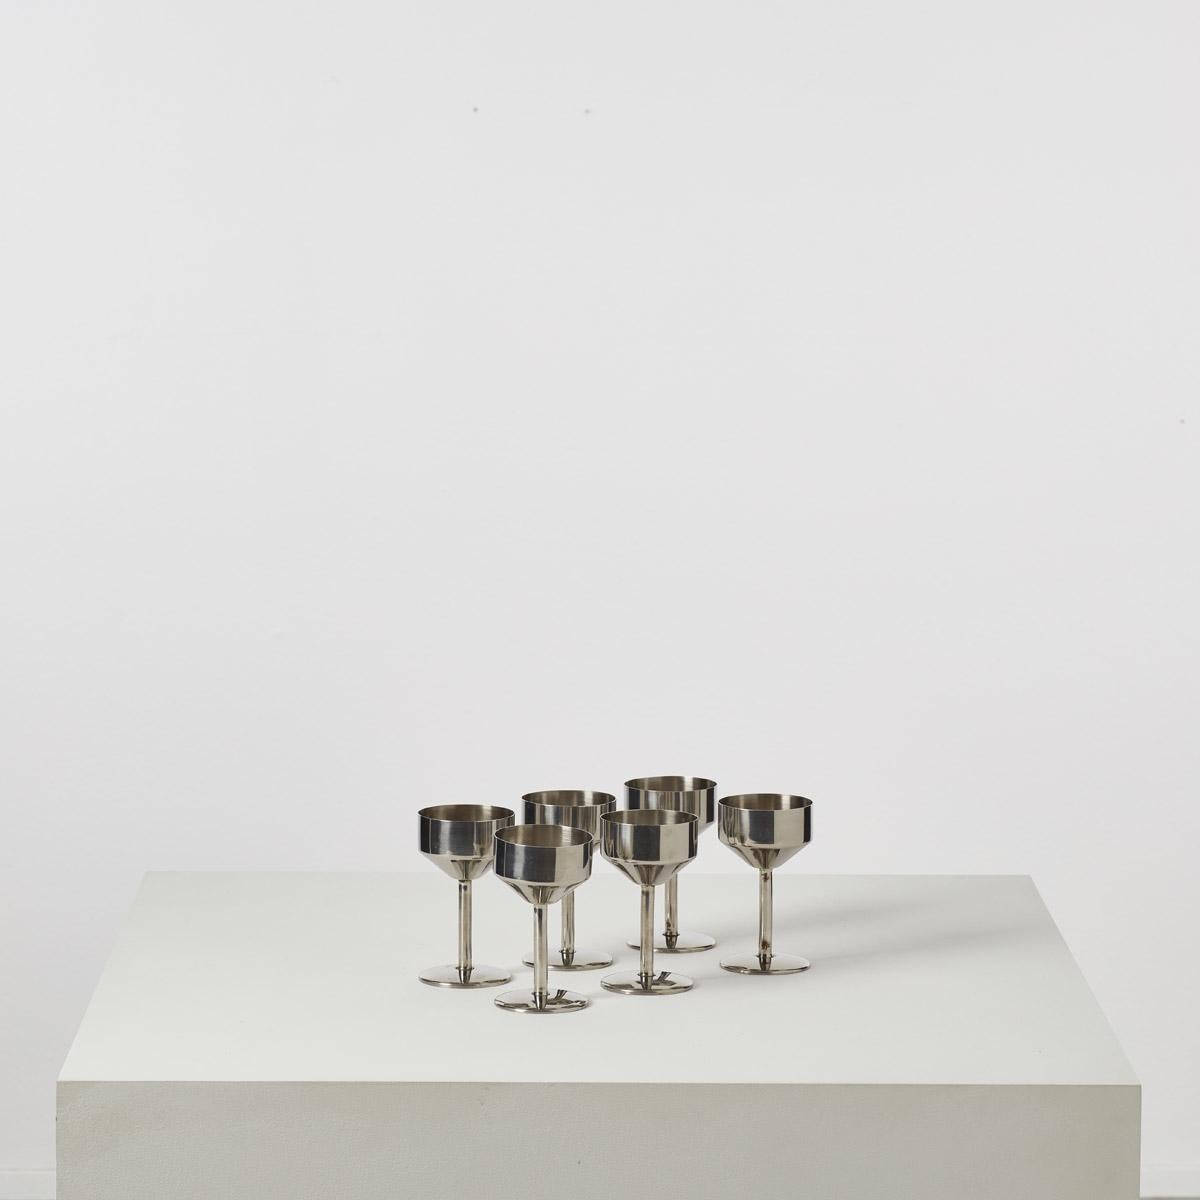 With a polished steel finish, these sleek metal wine goblets effortlessly blend vintage charm with contemporary simplicity. In good vintage condition with some light tarnishing to the surfaces, still in functional condition. Stamped to the underside